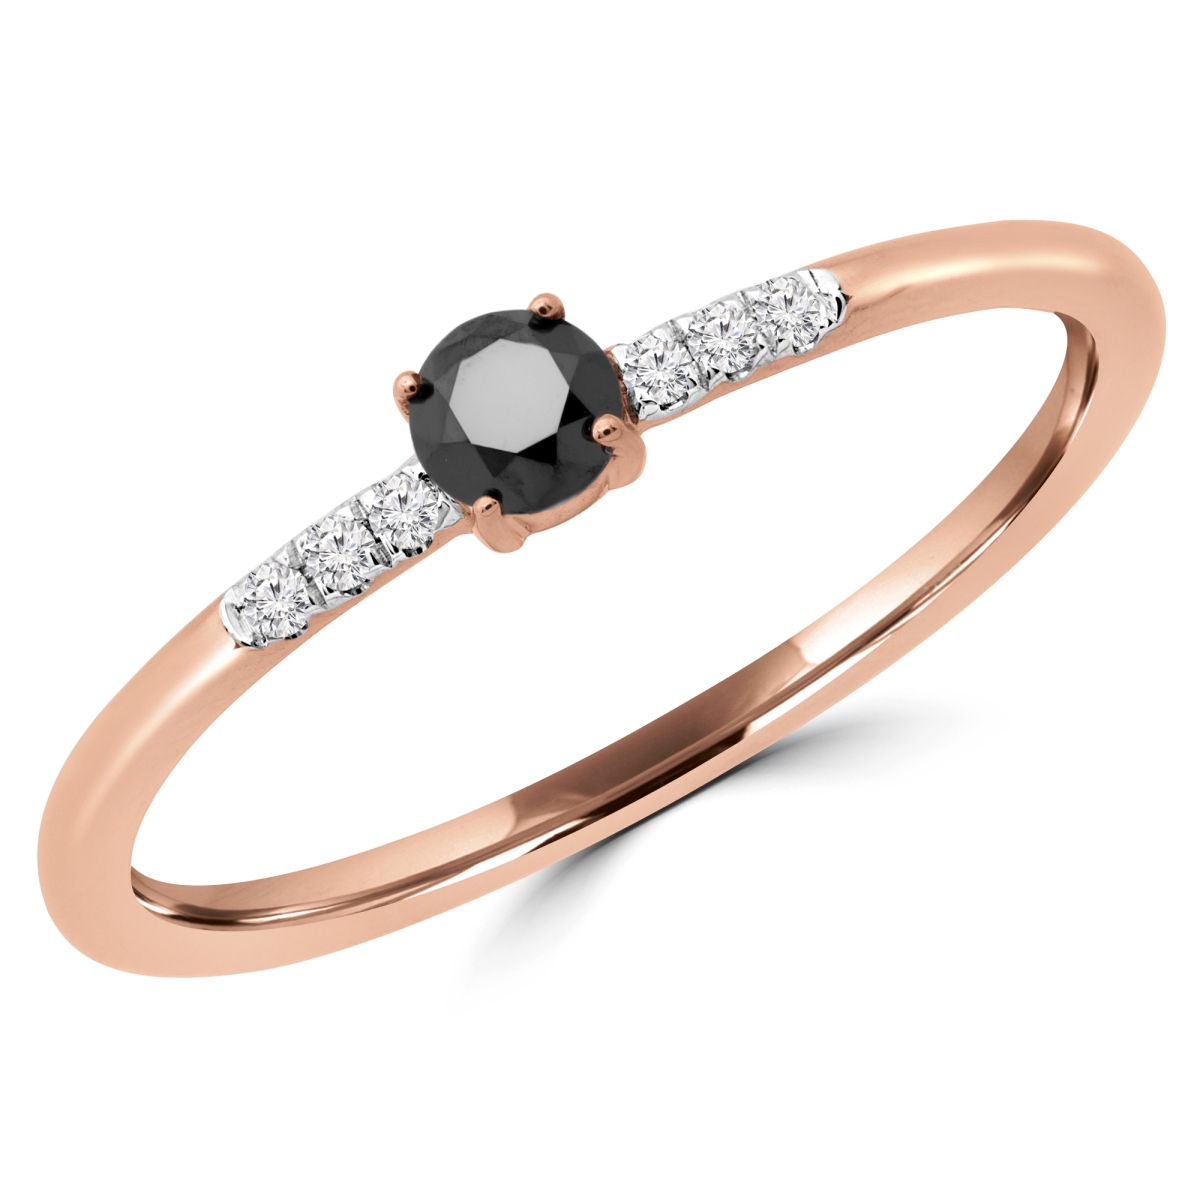 Picture of Majesty Diamonds MDR190079-8.75 0.16 CTW Round Black Diamond Bezel Set Cocktail Ring in 14K Rose Gold - Size 8.75